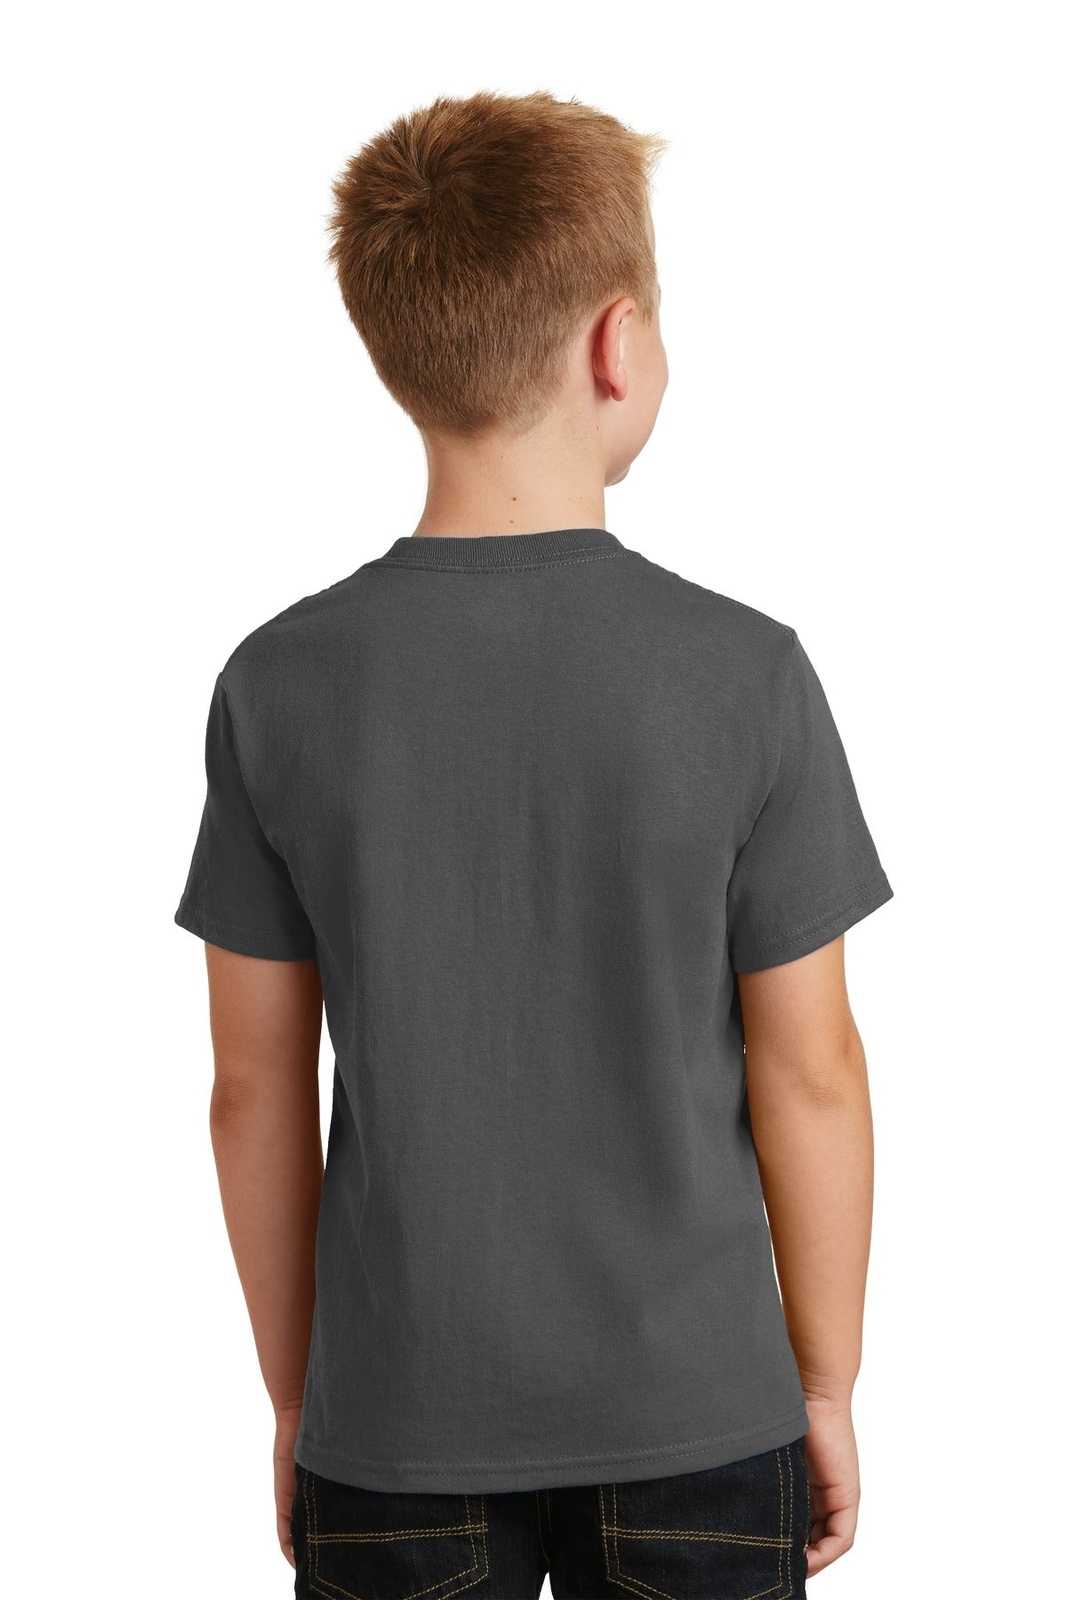 Port & Company PC54Y Youth Core Cotton Tee - Charcoal - HIT a Double - 1